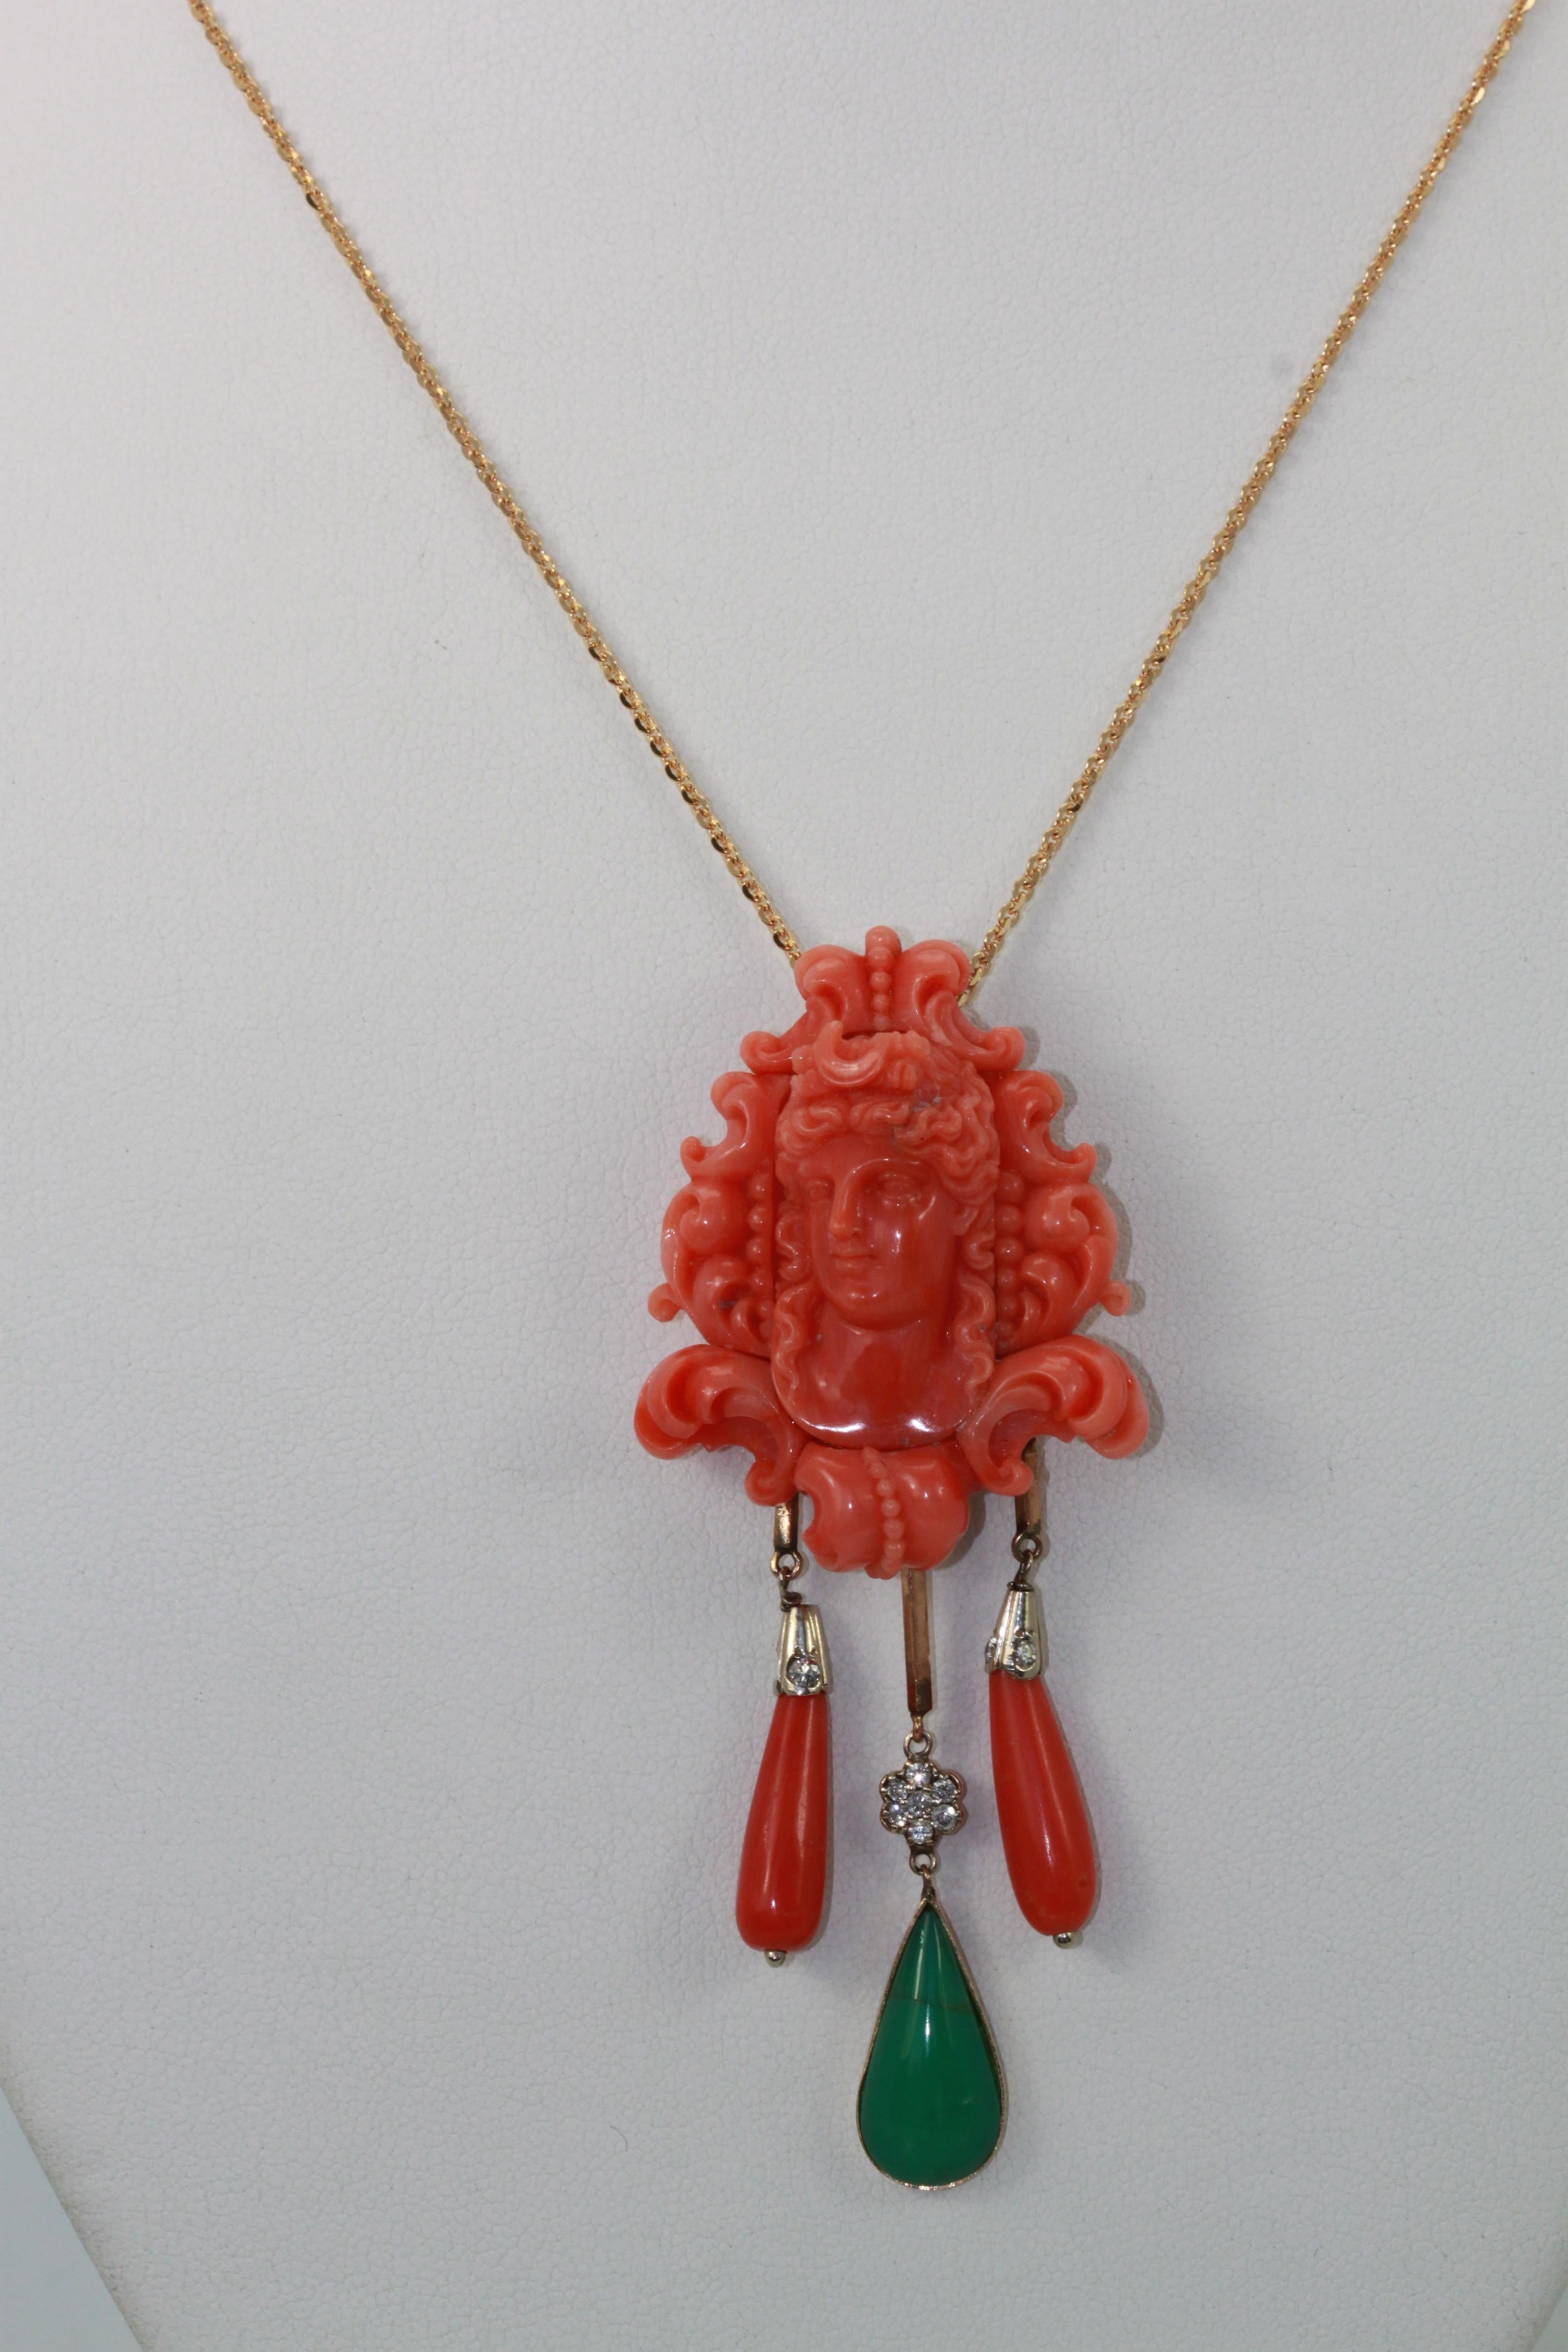 Carved Coral Brooch Pendant W/ Coral Drops and Crystophase Drop For Sale 1